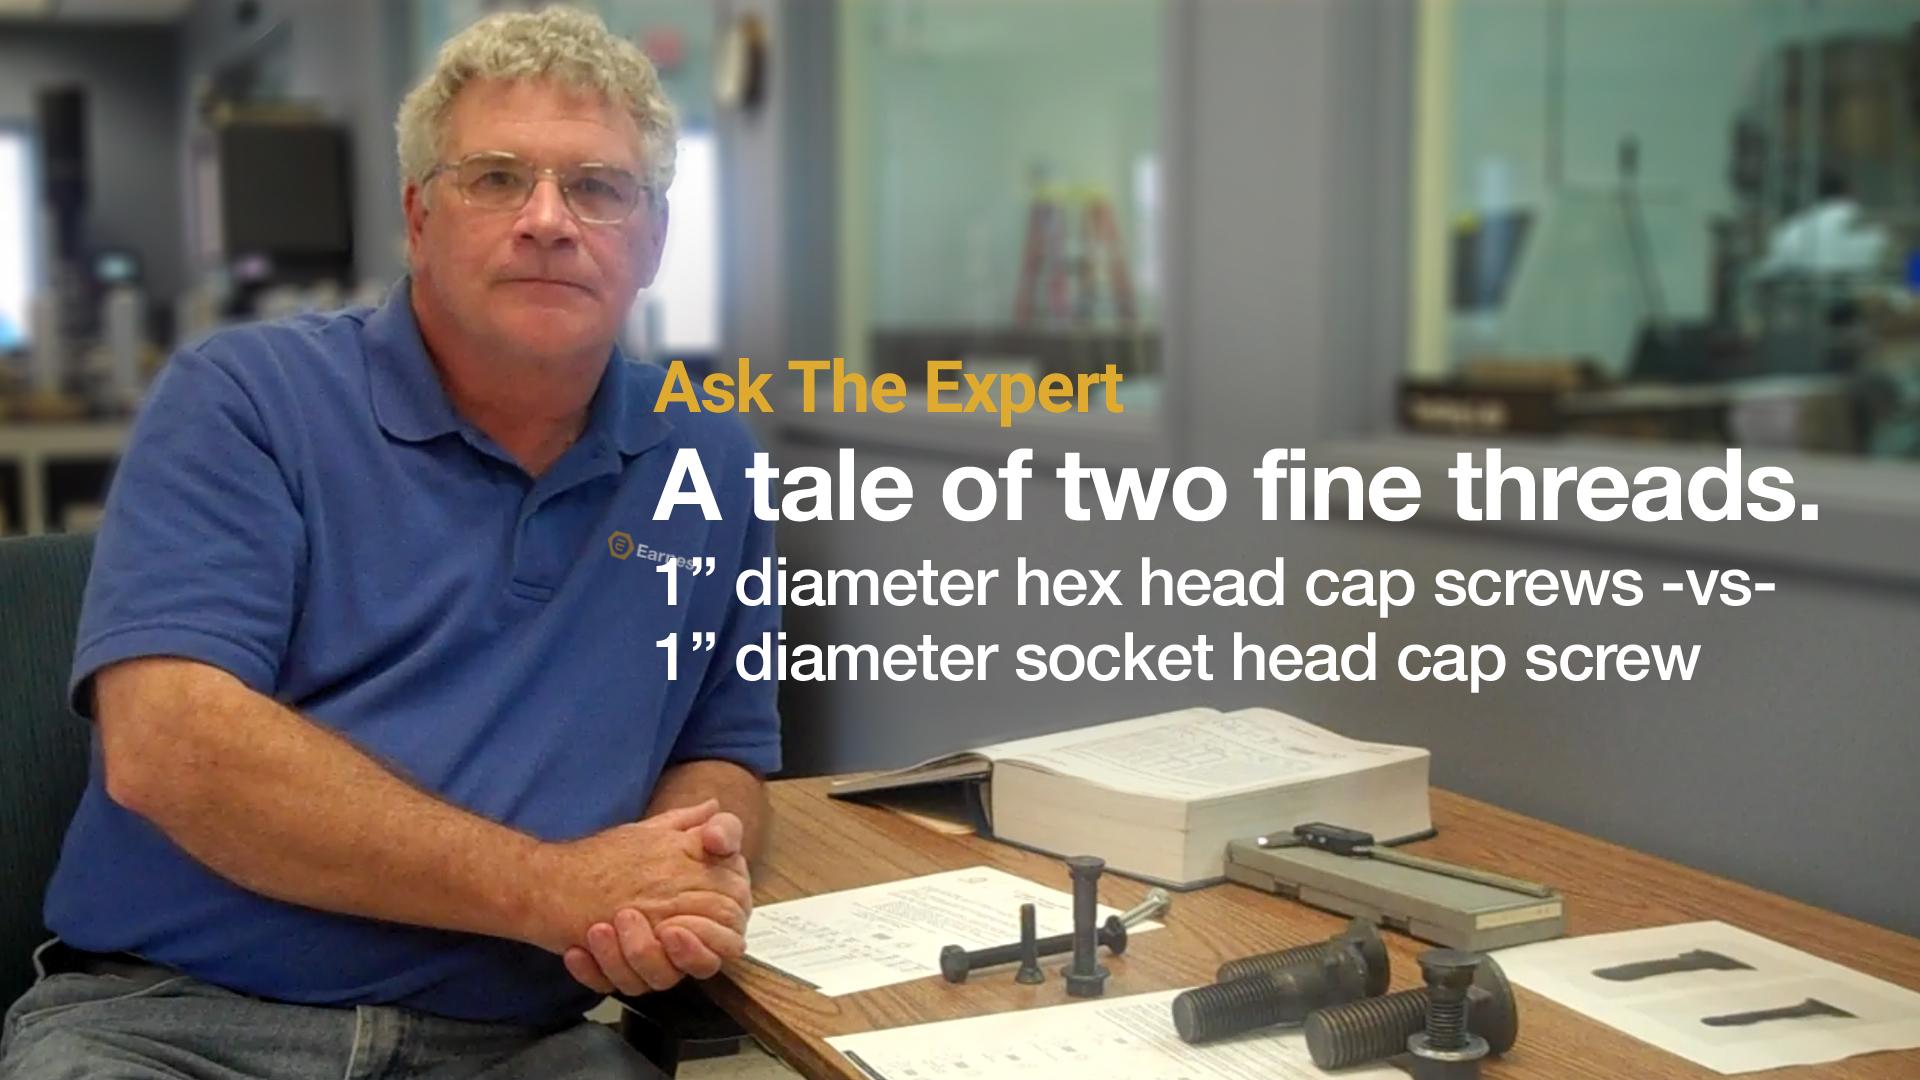 Ask the expert: A tale of two fine threads